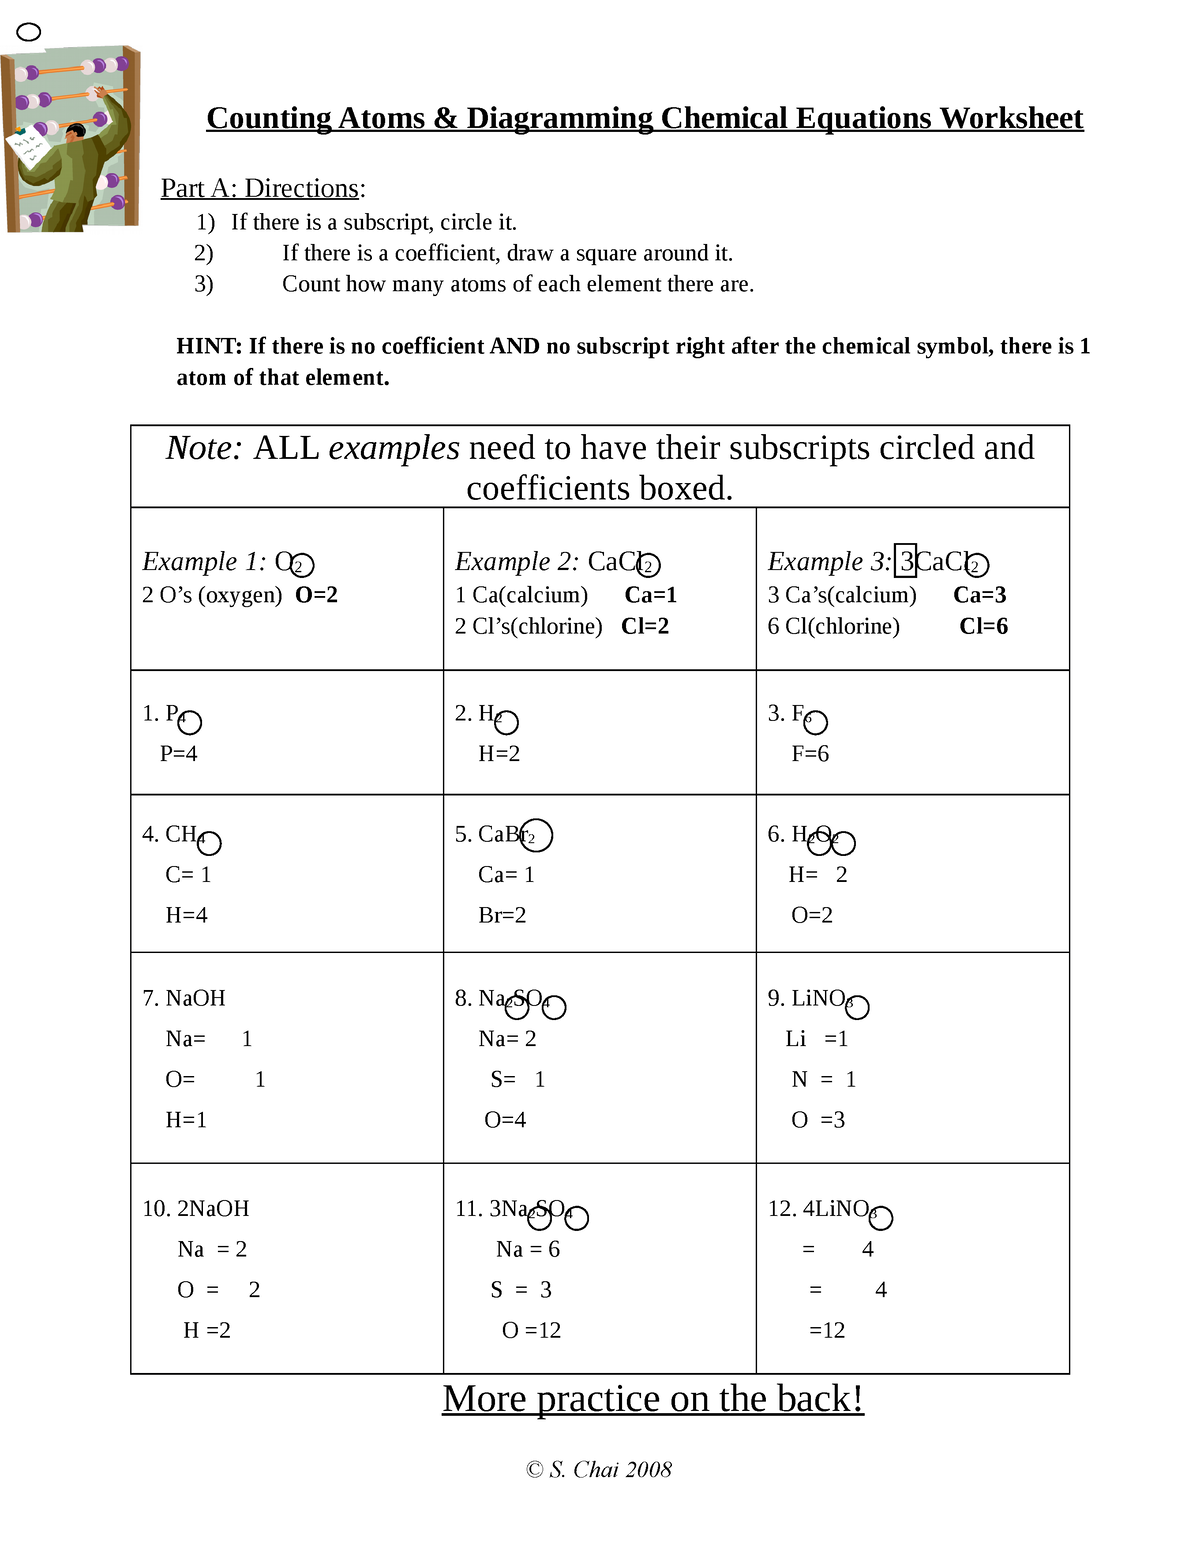 copy-of-counting-atoms-worksheet-counting-atoms-diagramming-chemical-equations-worksheet